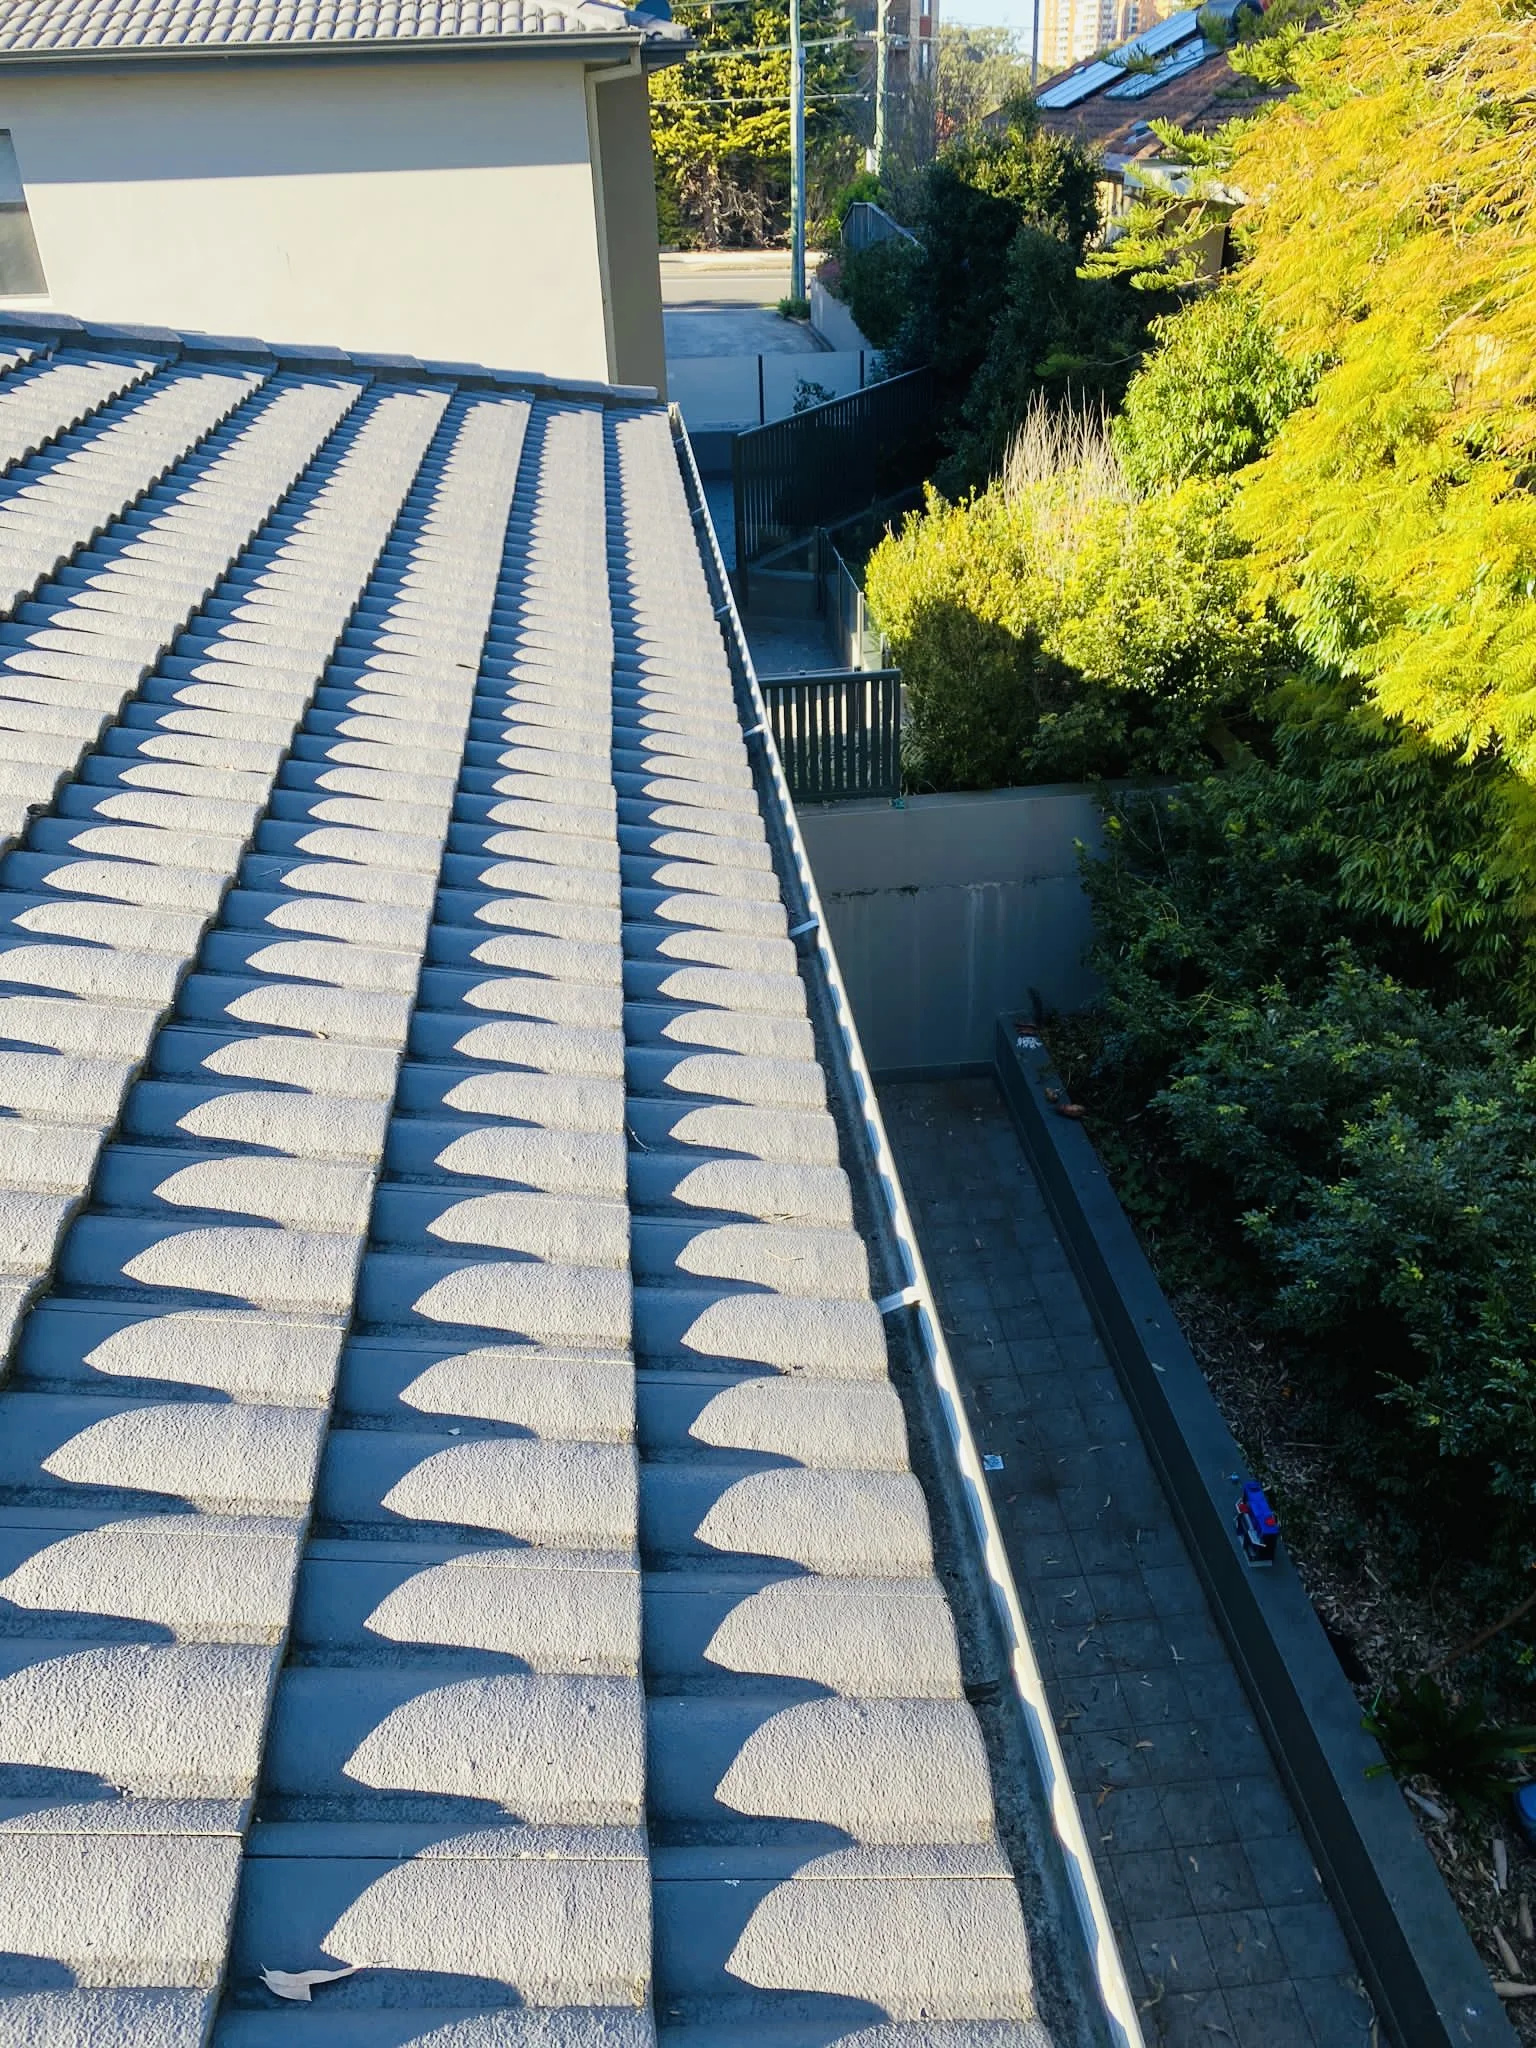 gutter cleaning in epping